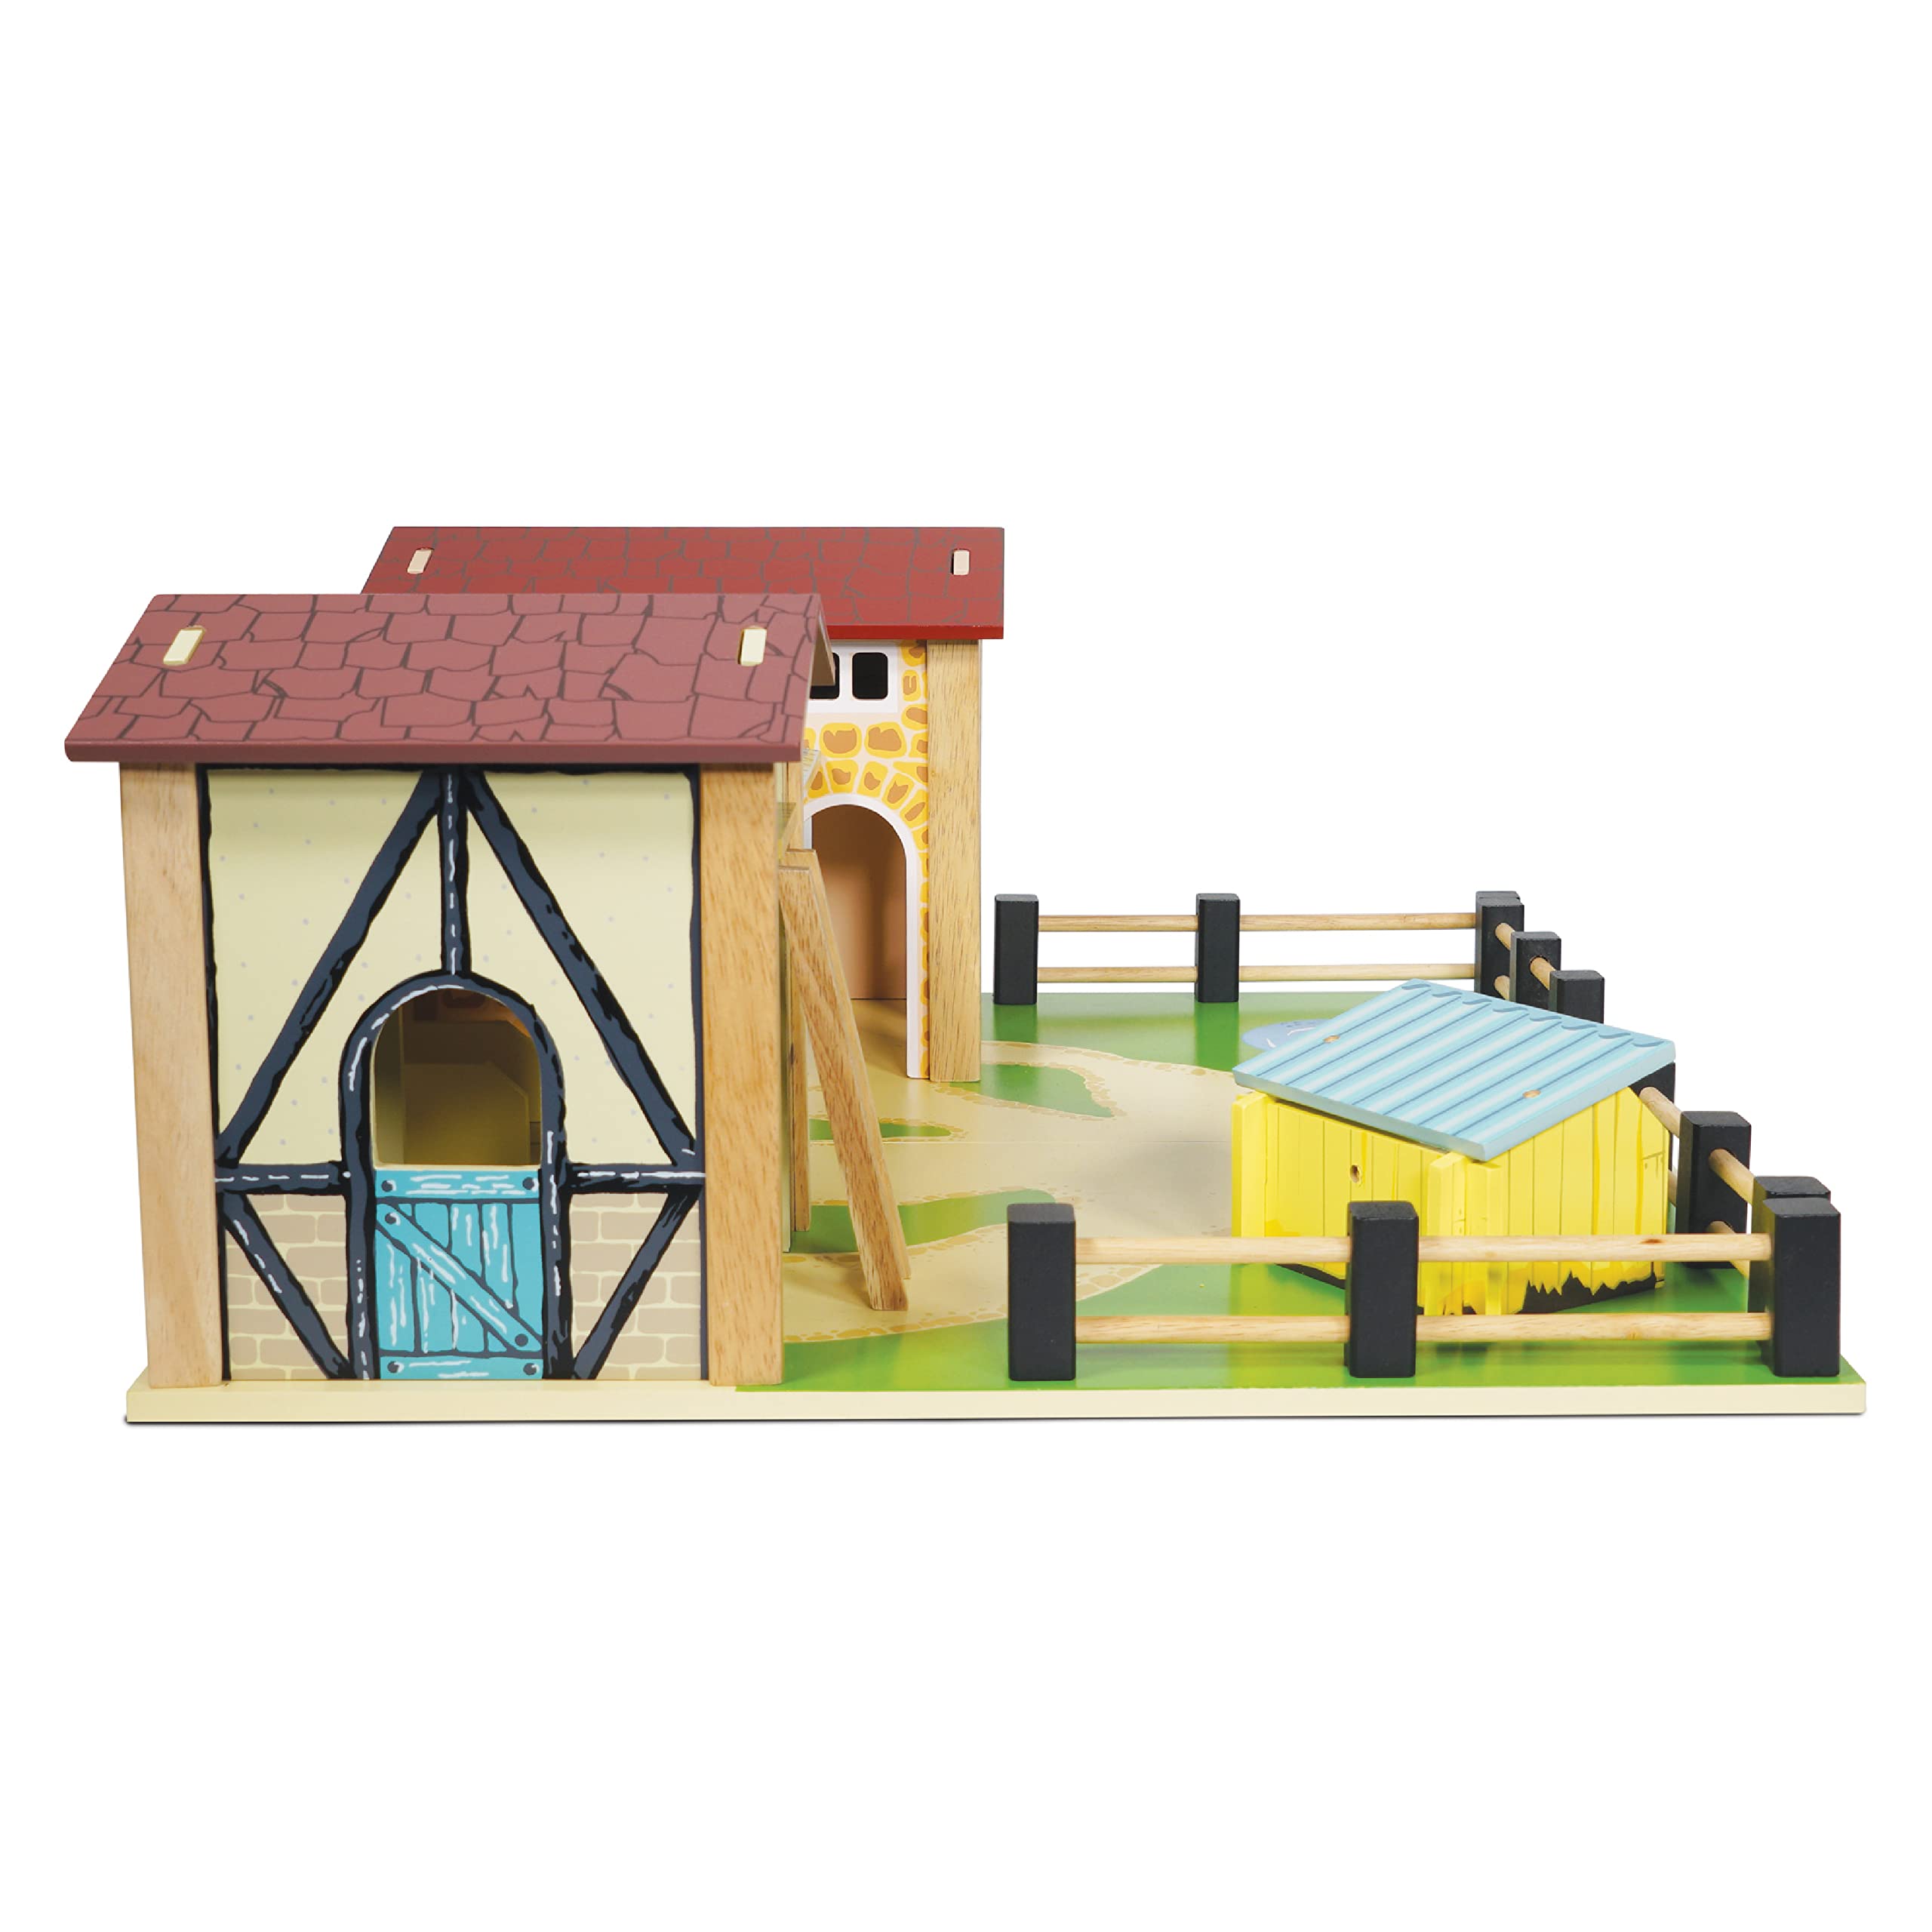 Le Toy Van - Educational Wooden Toy Colourful Wooden Farm Playset | Great Interactive Role Play Gifts for A Boy Or Girl - 3+ Years (TV410)